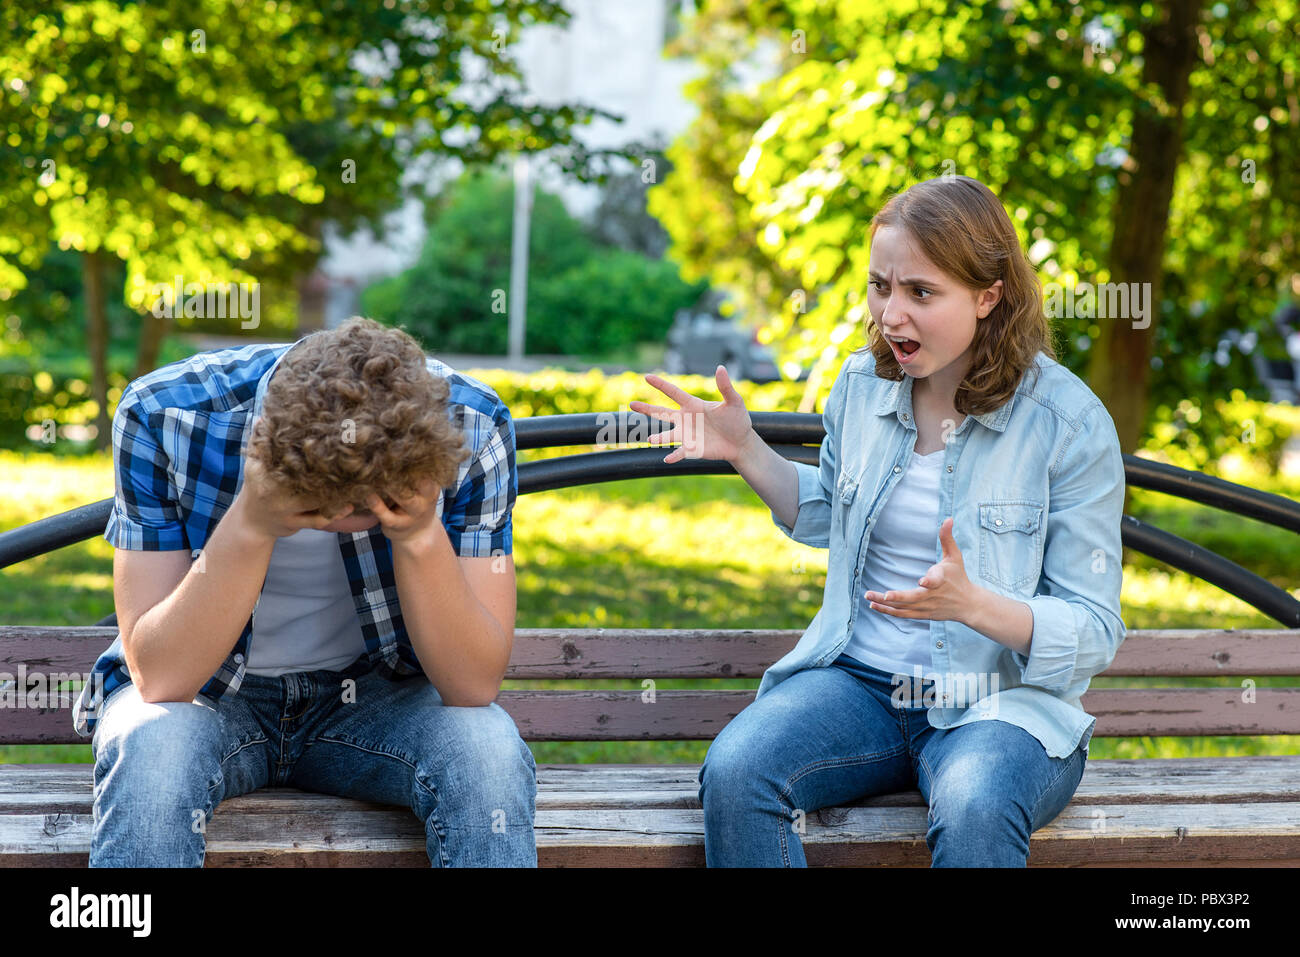 The girl screams at young man. Summer in park on a bench. The guy is crying and sad, clasping his head in his hands. Scandal in family. The concept of aggression and the problem in relationship. Stock Photo